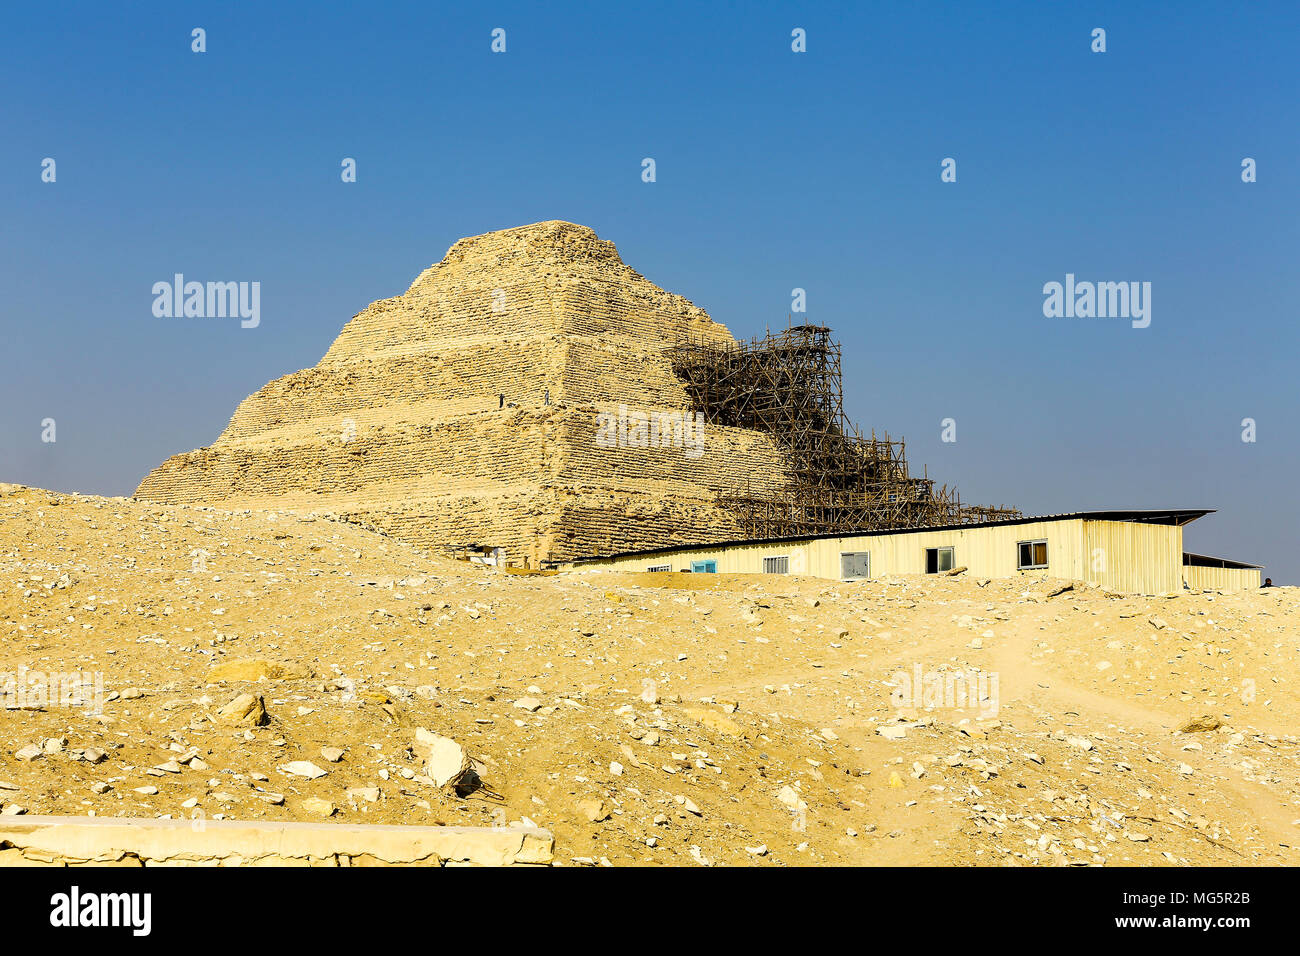 The Pyramid of Djoser, or step pyramid, the oldest pyramid in the world, an archaeological remain in the Saqqara necropolis, Saqqara, Egypt, Africa Stock Photo